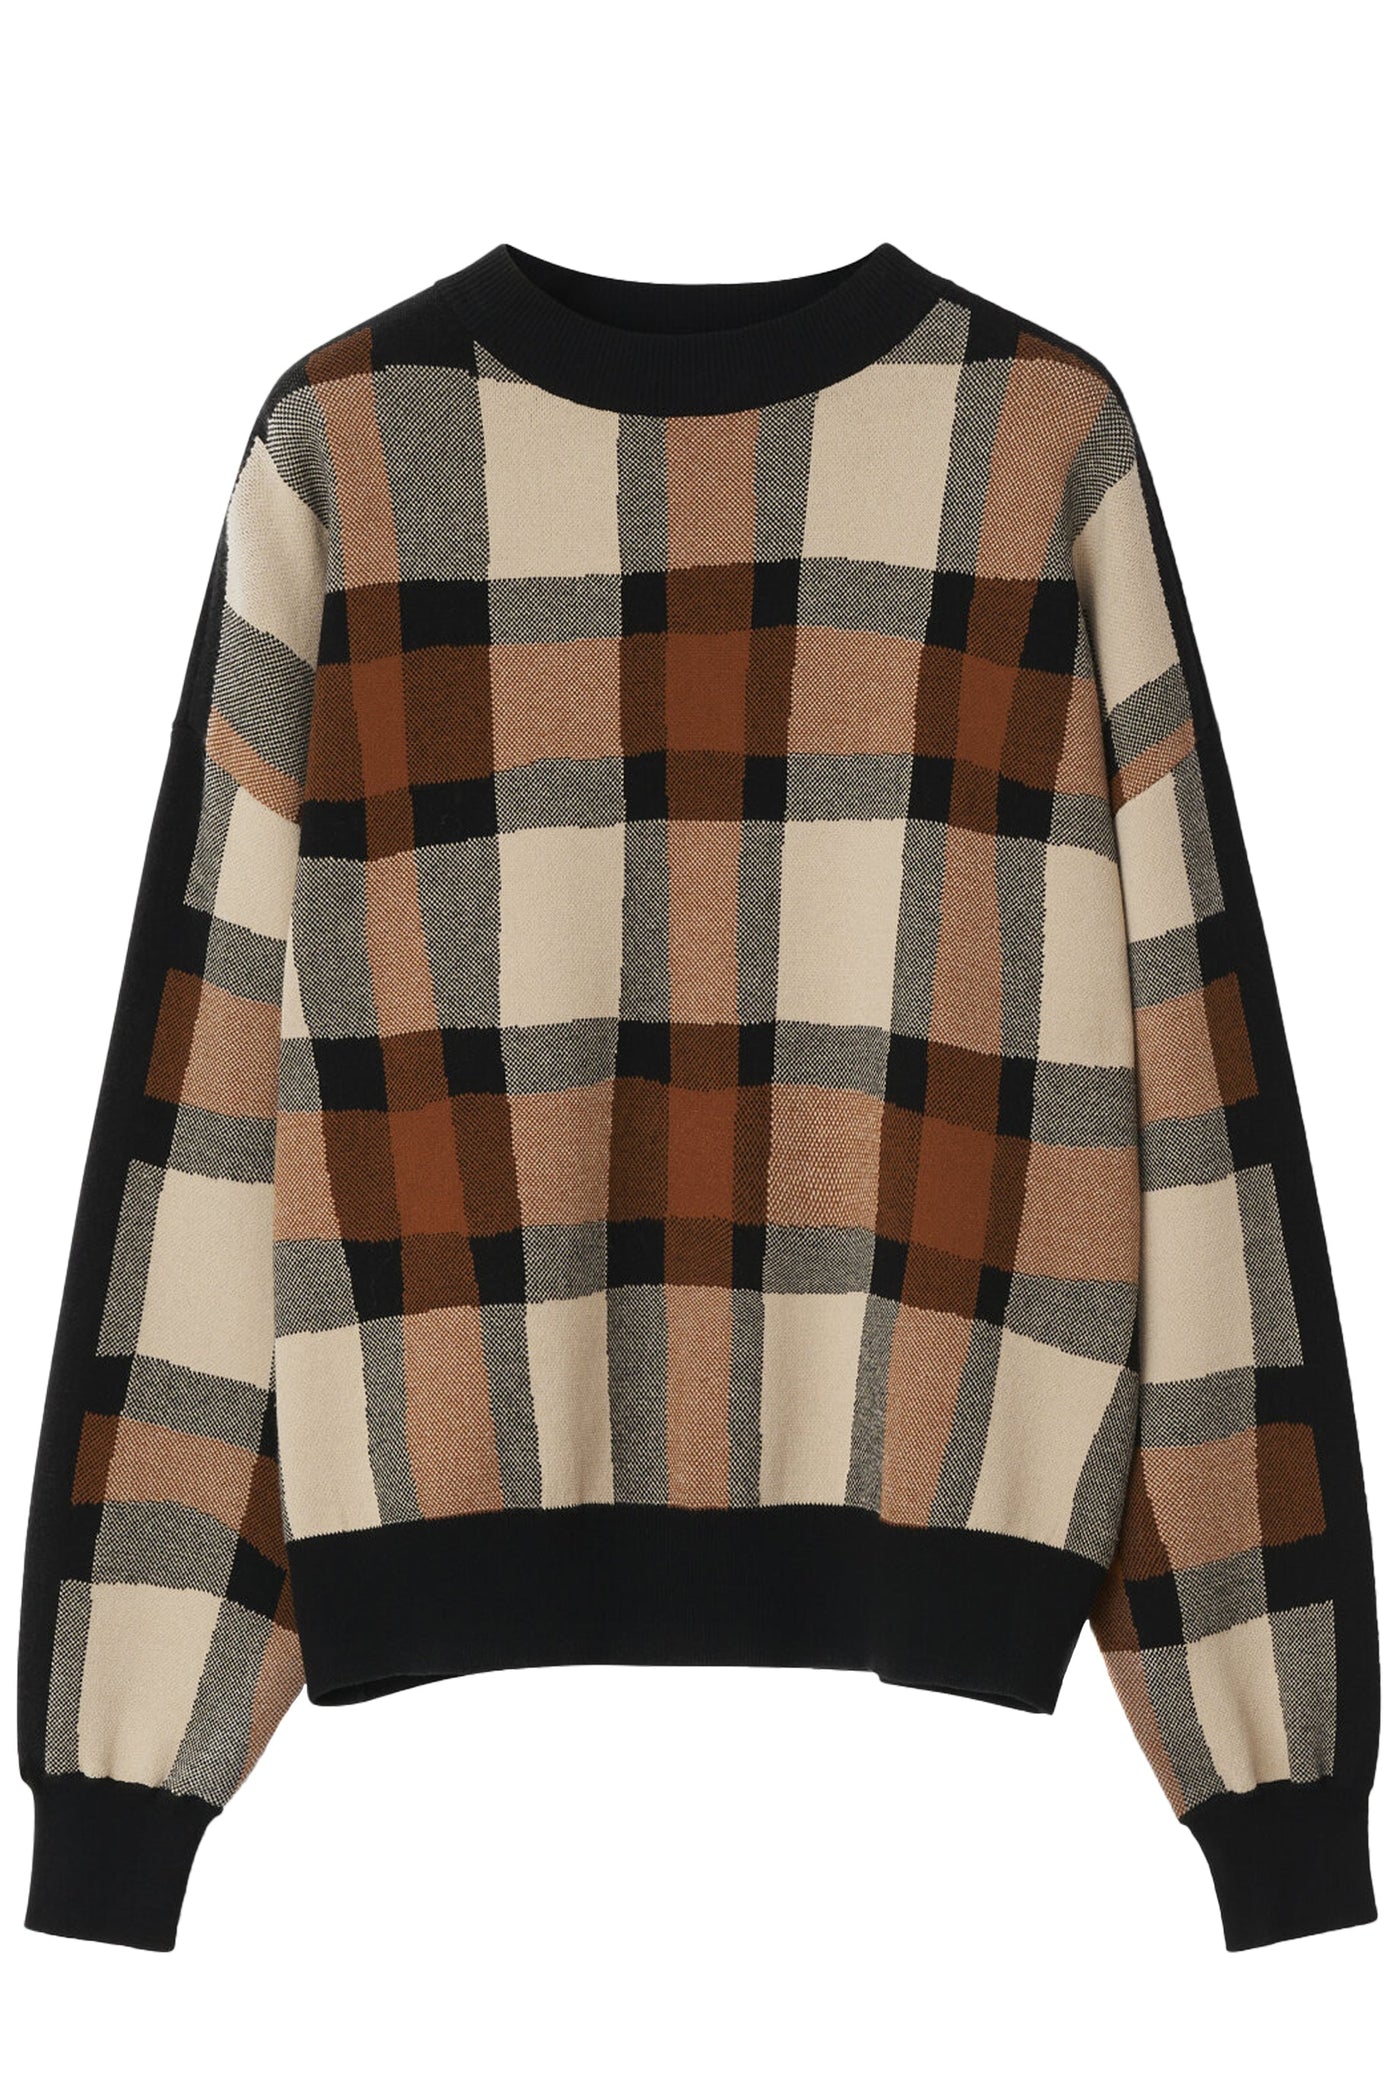 Rodebjer Reilly Knit - Check